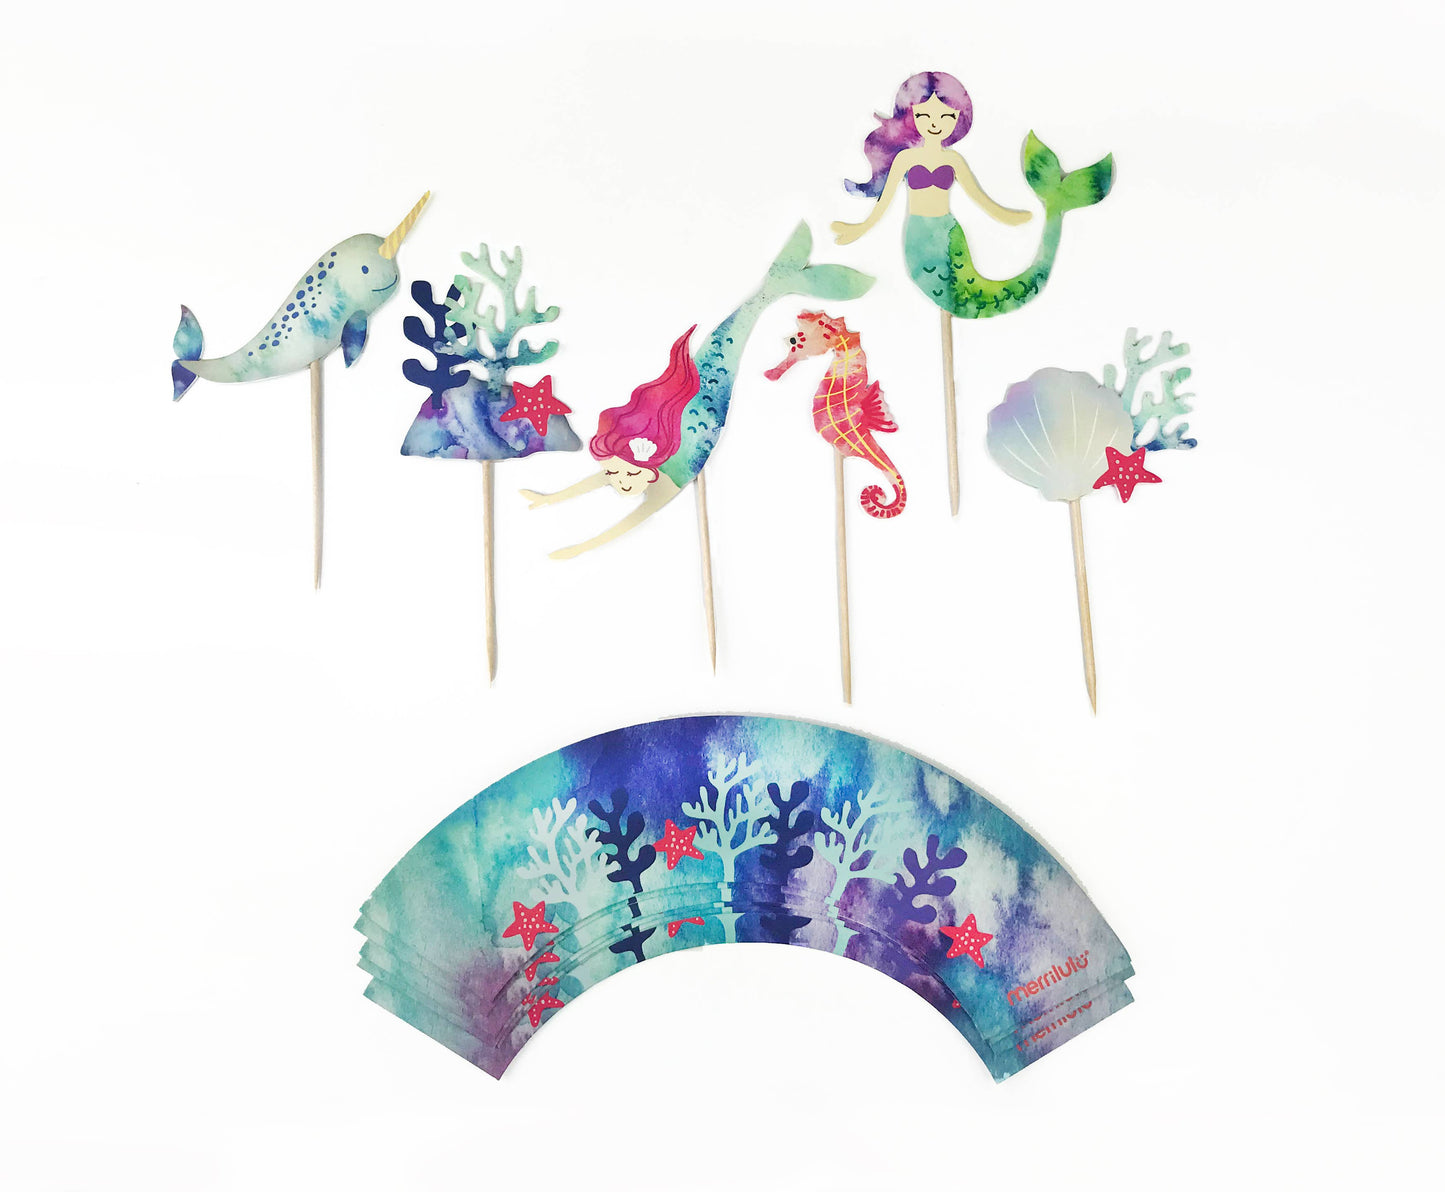 Mermaid and Narwhal - Cupcake Toppers and Wrappers, 12 ct